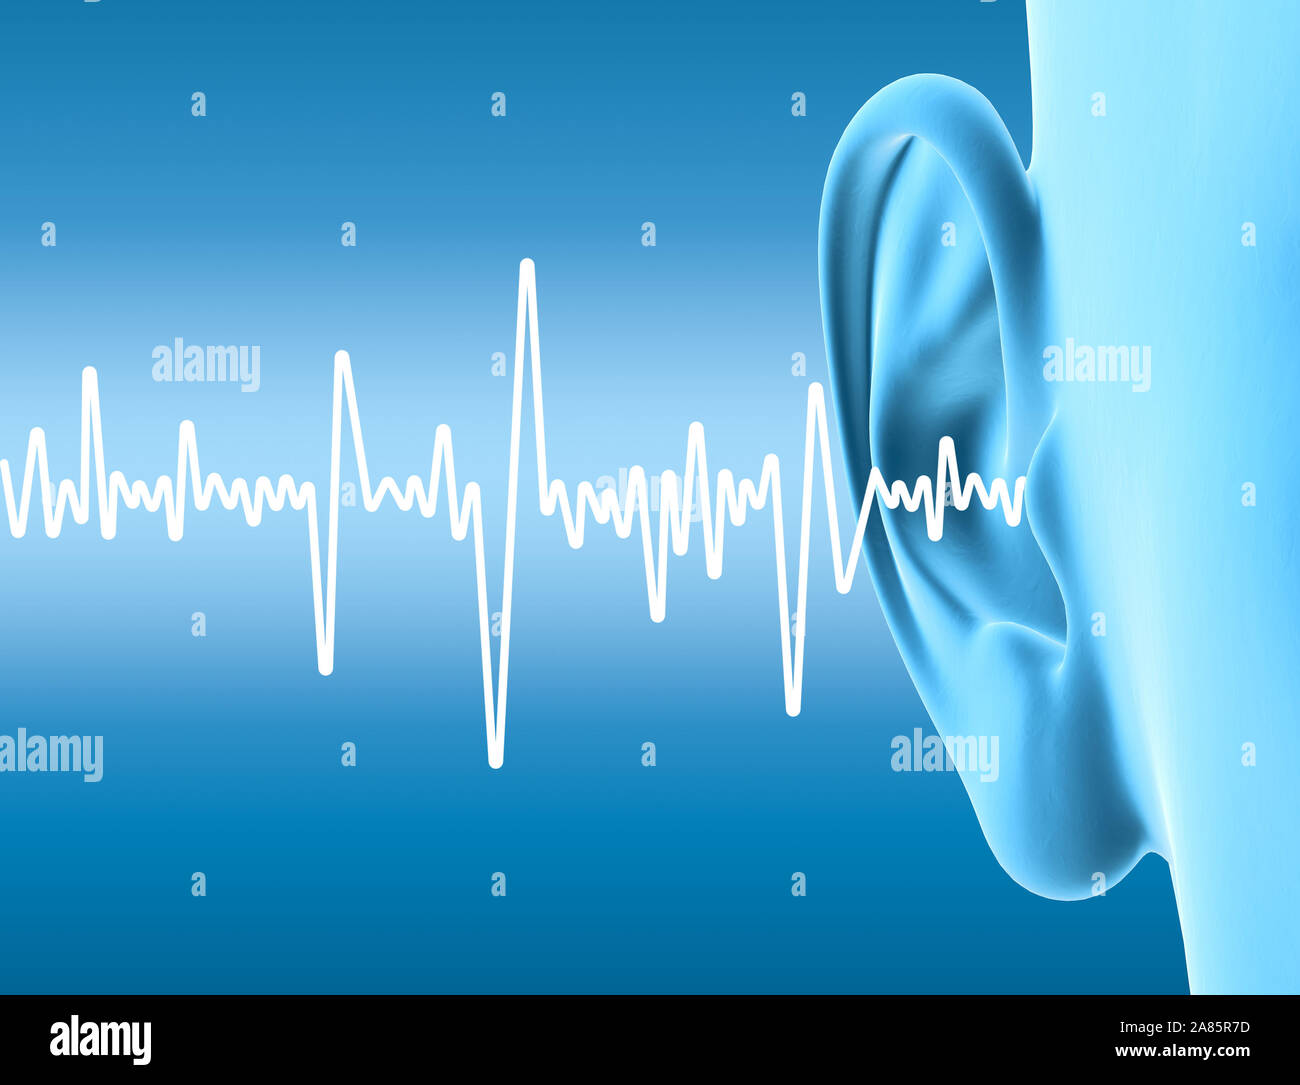 3D illustration showing human ear with sound wave Stock Photo